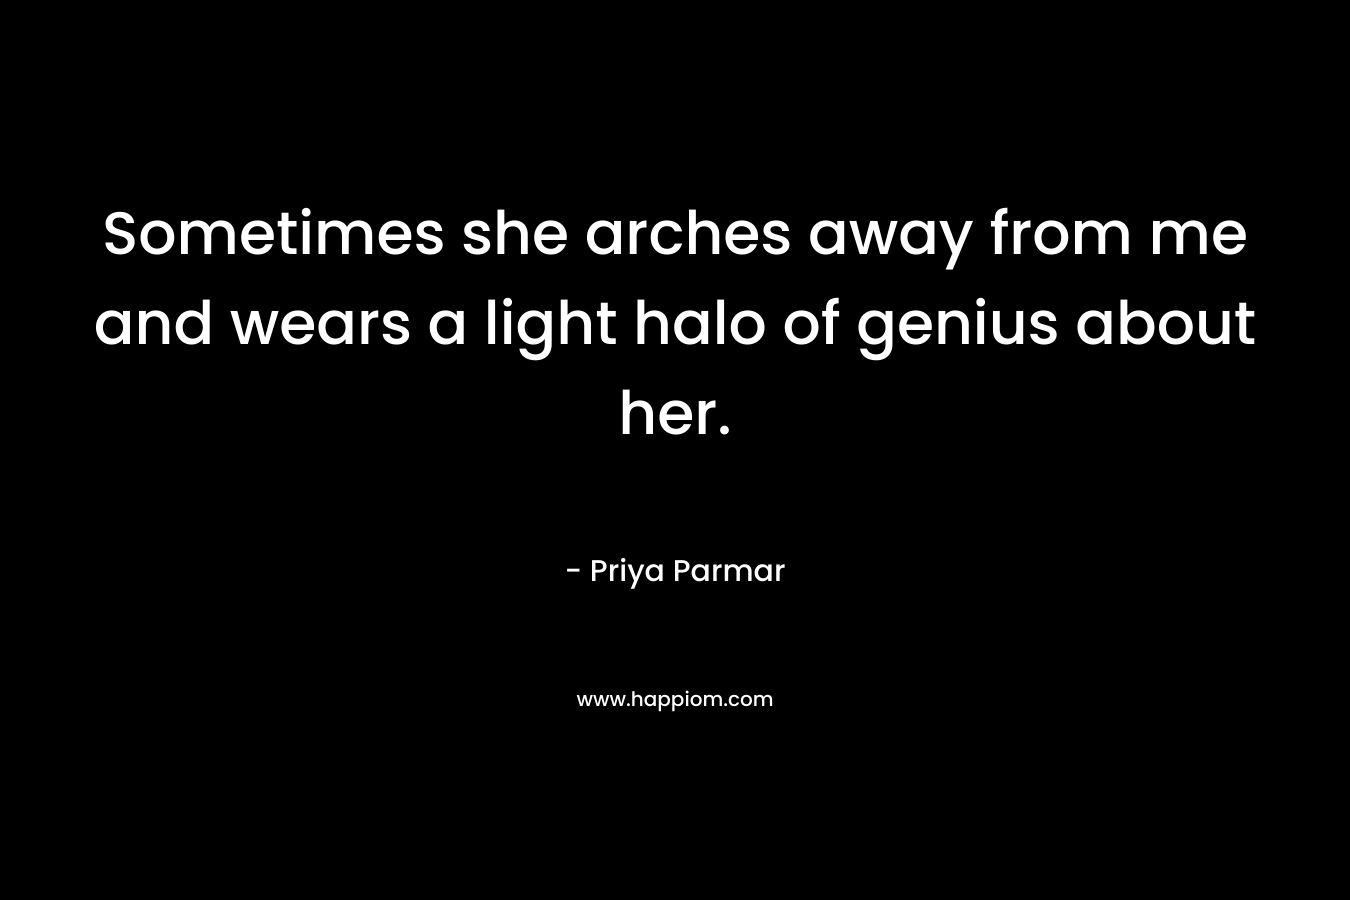 Sometimes she arches away from me and wears a light halo of genius about her. – Priya Parmar